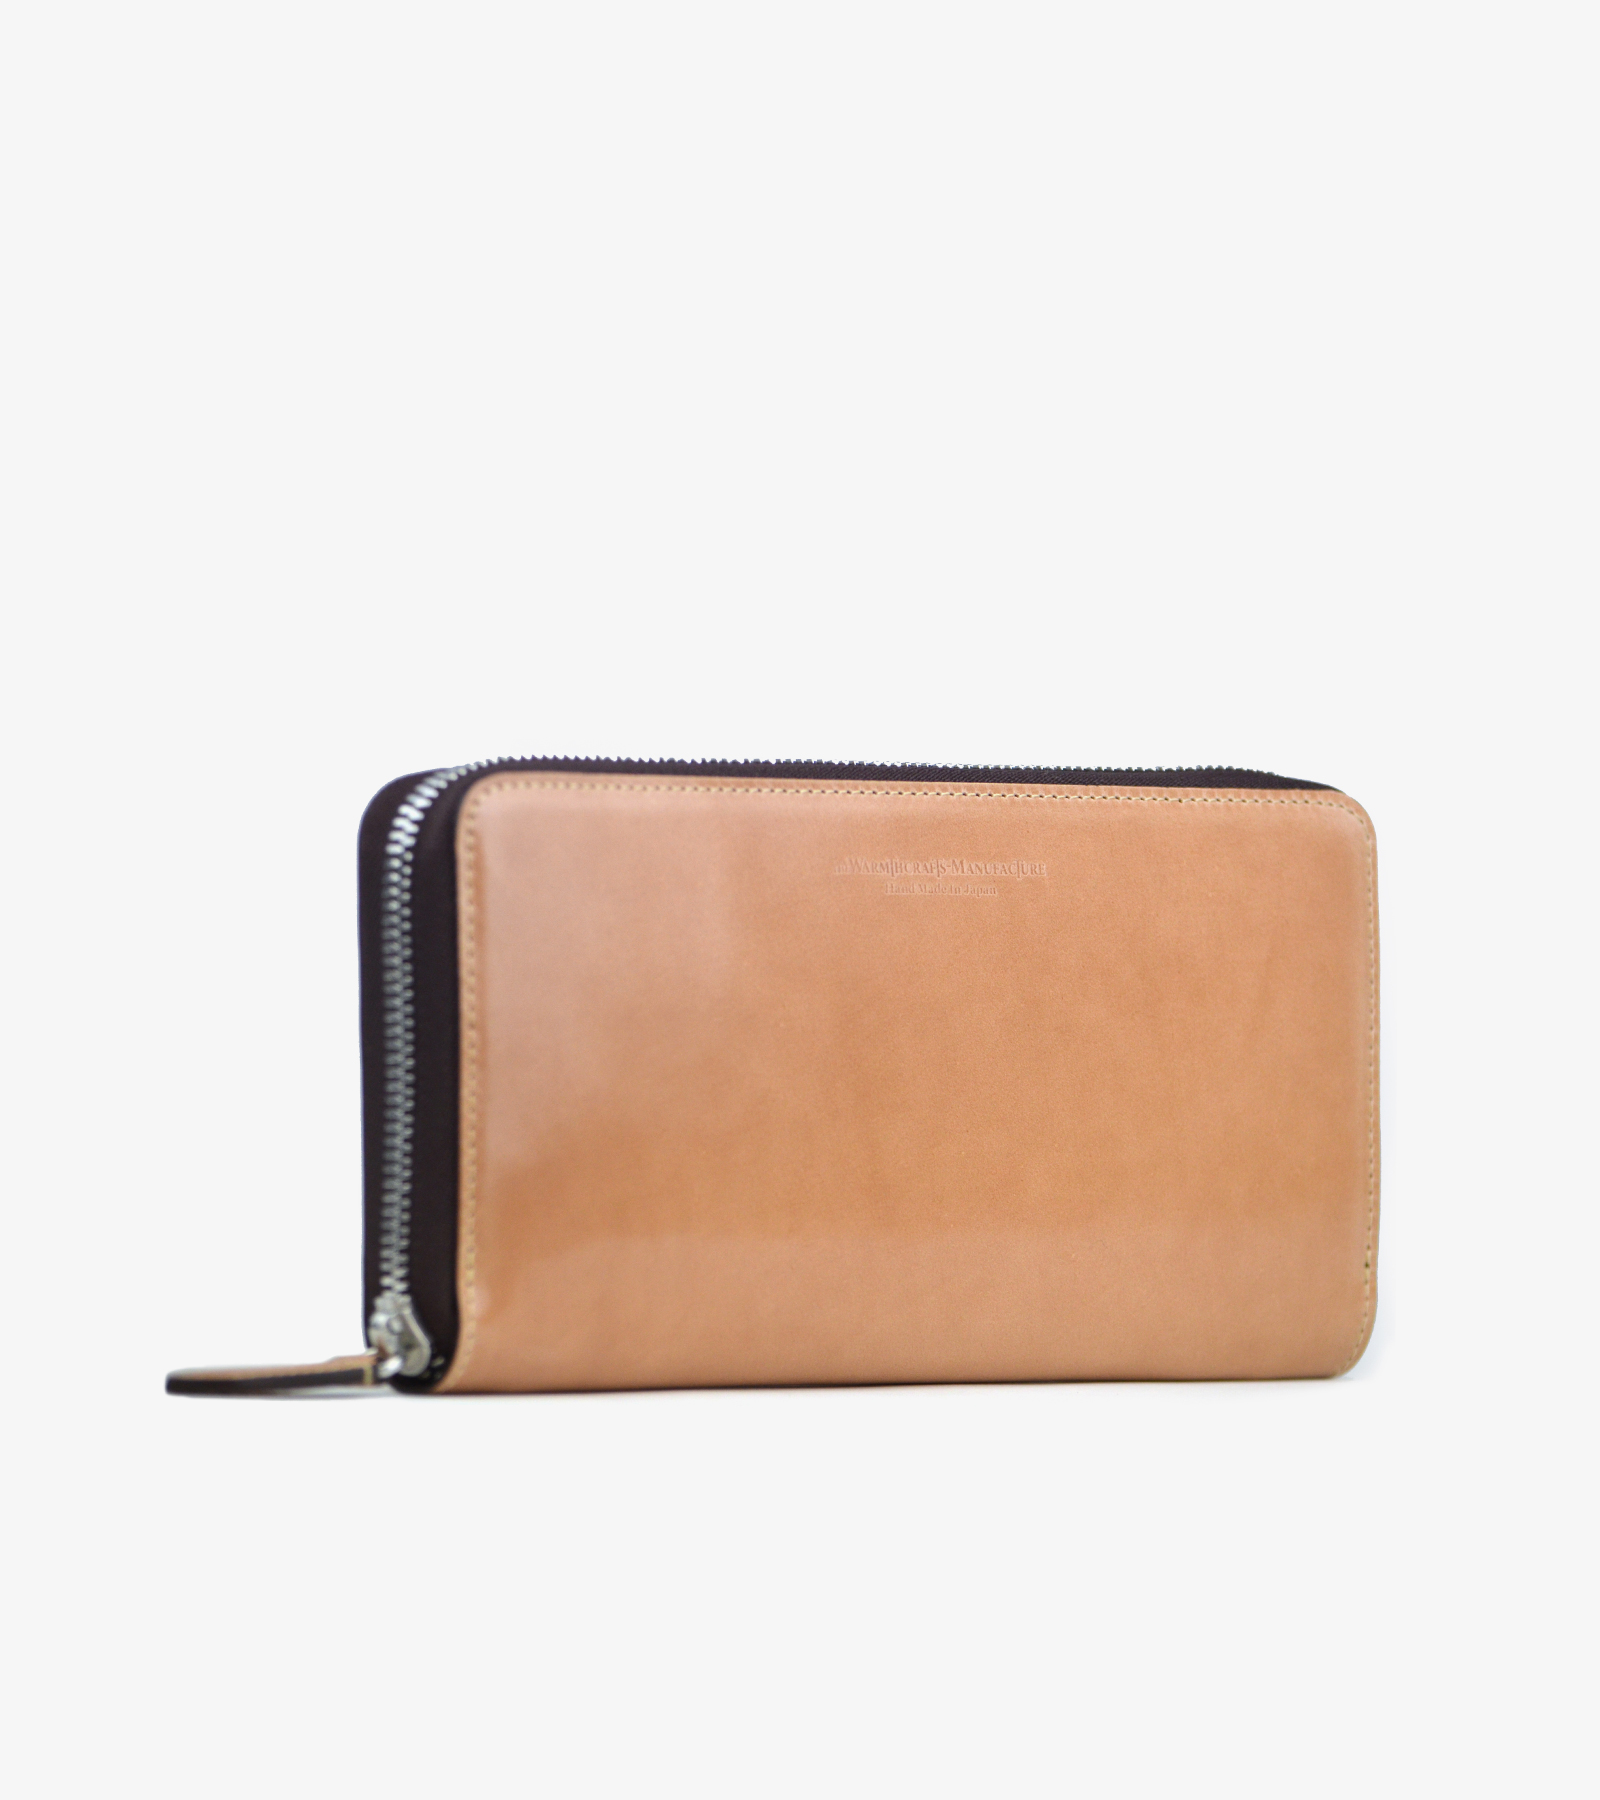 CORDOVAN ZIPPED LONG WALLET / The Warmthcrafts Manufacture Web Store